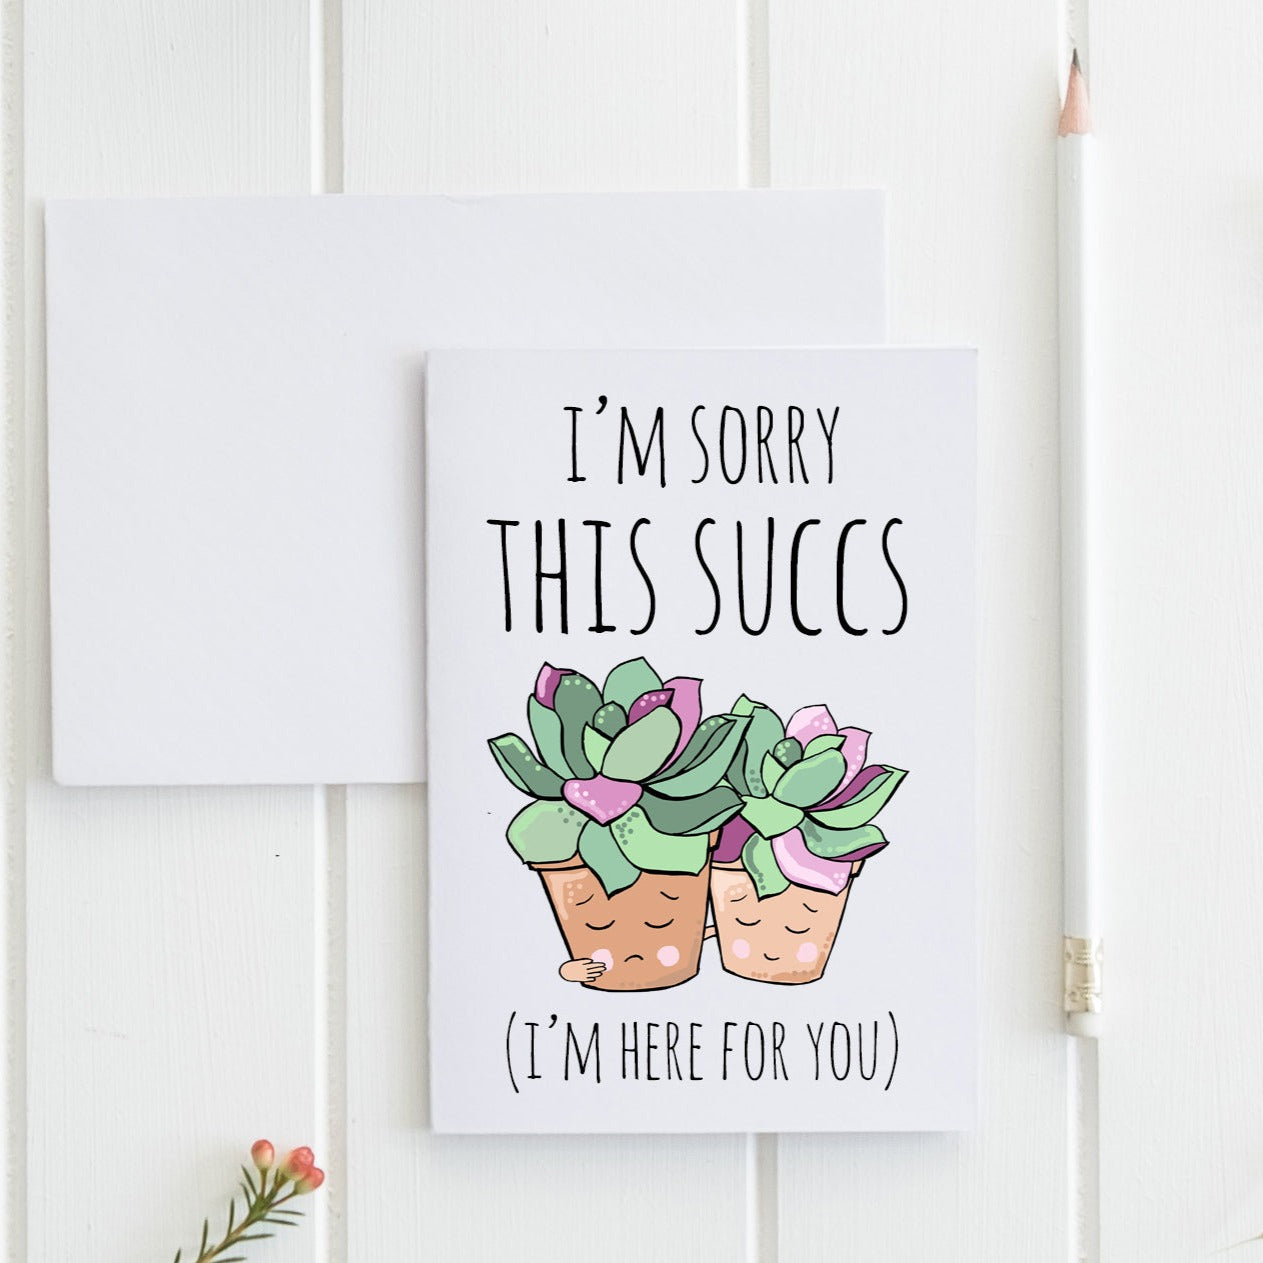 Sorry This Succs (I'm Here For You) - Greeting Card